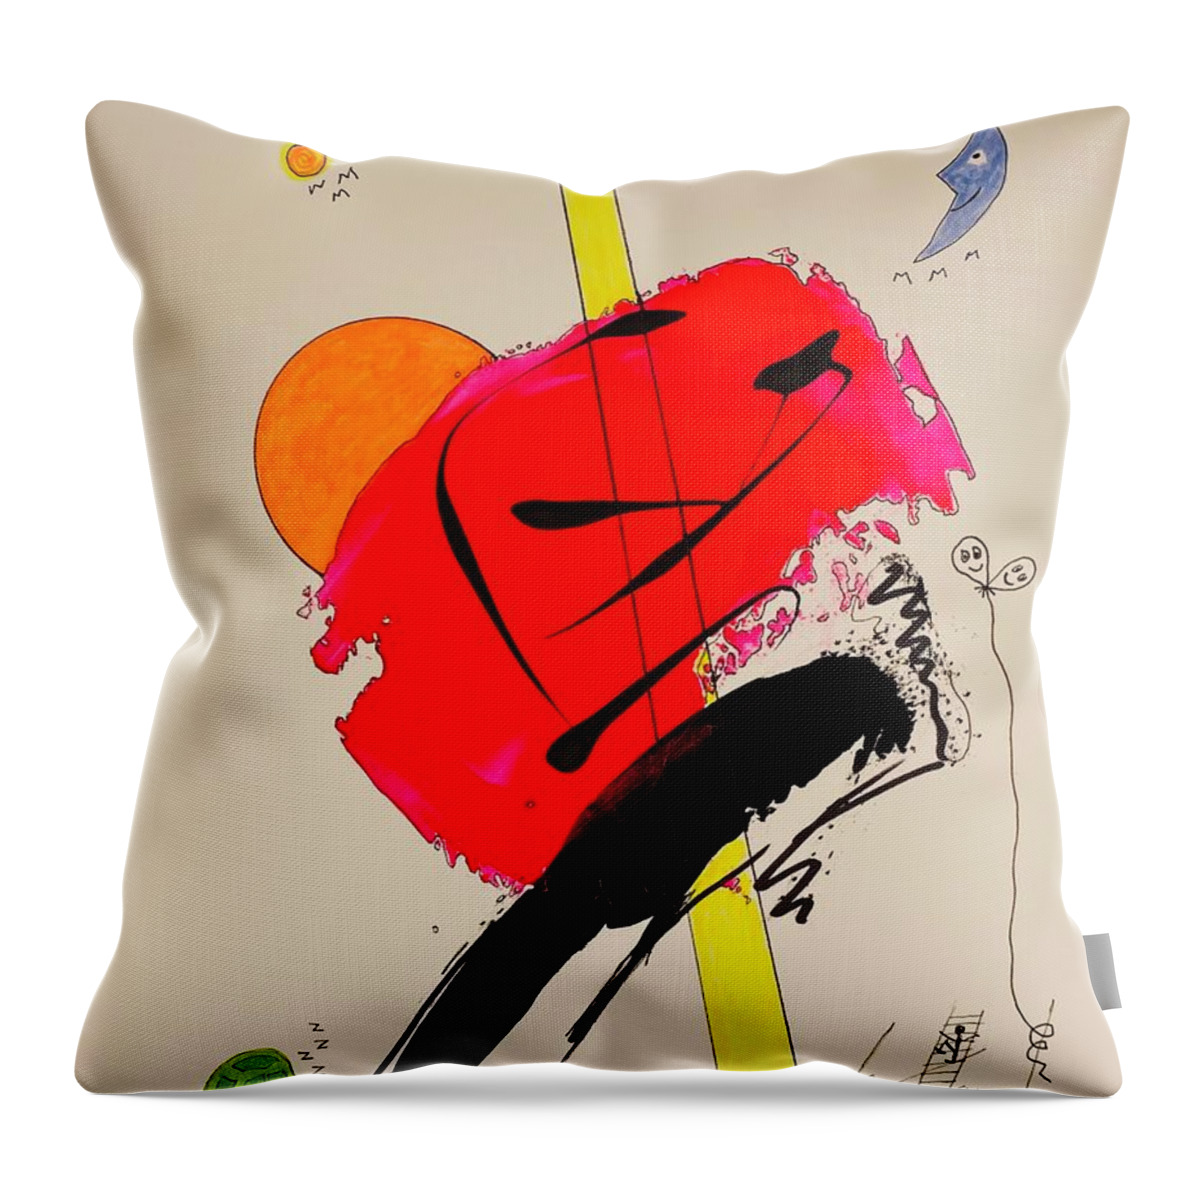  Throw Pillow featuring the mixed media K.i.s.s. Red 11148 by Lew Hagood